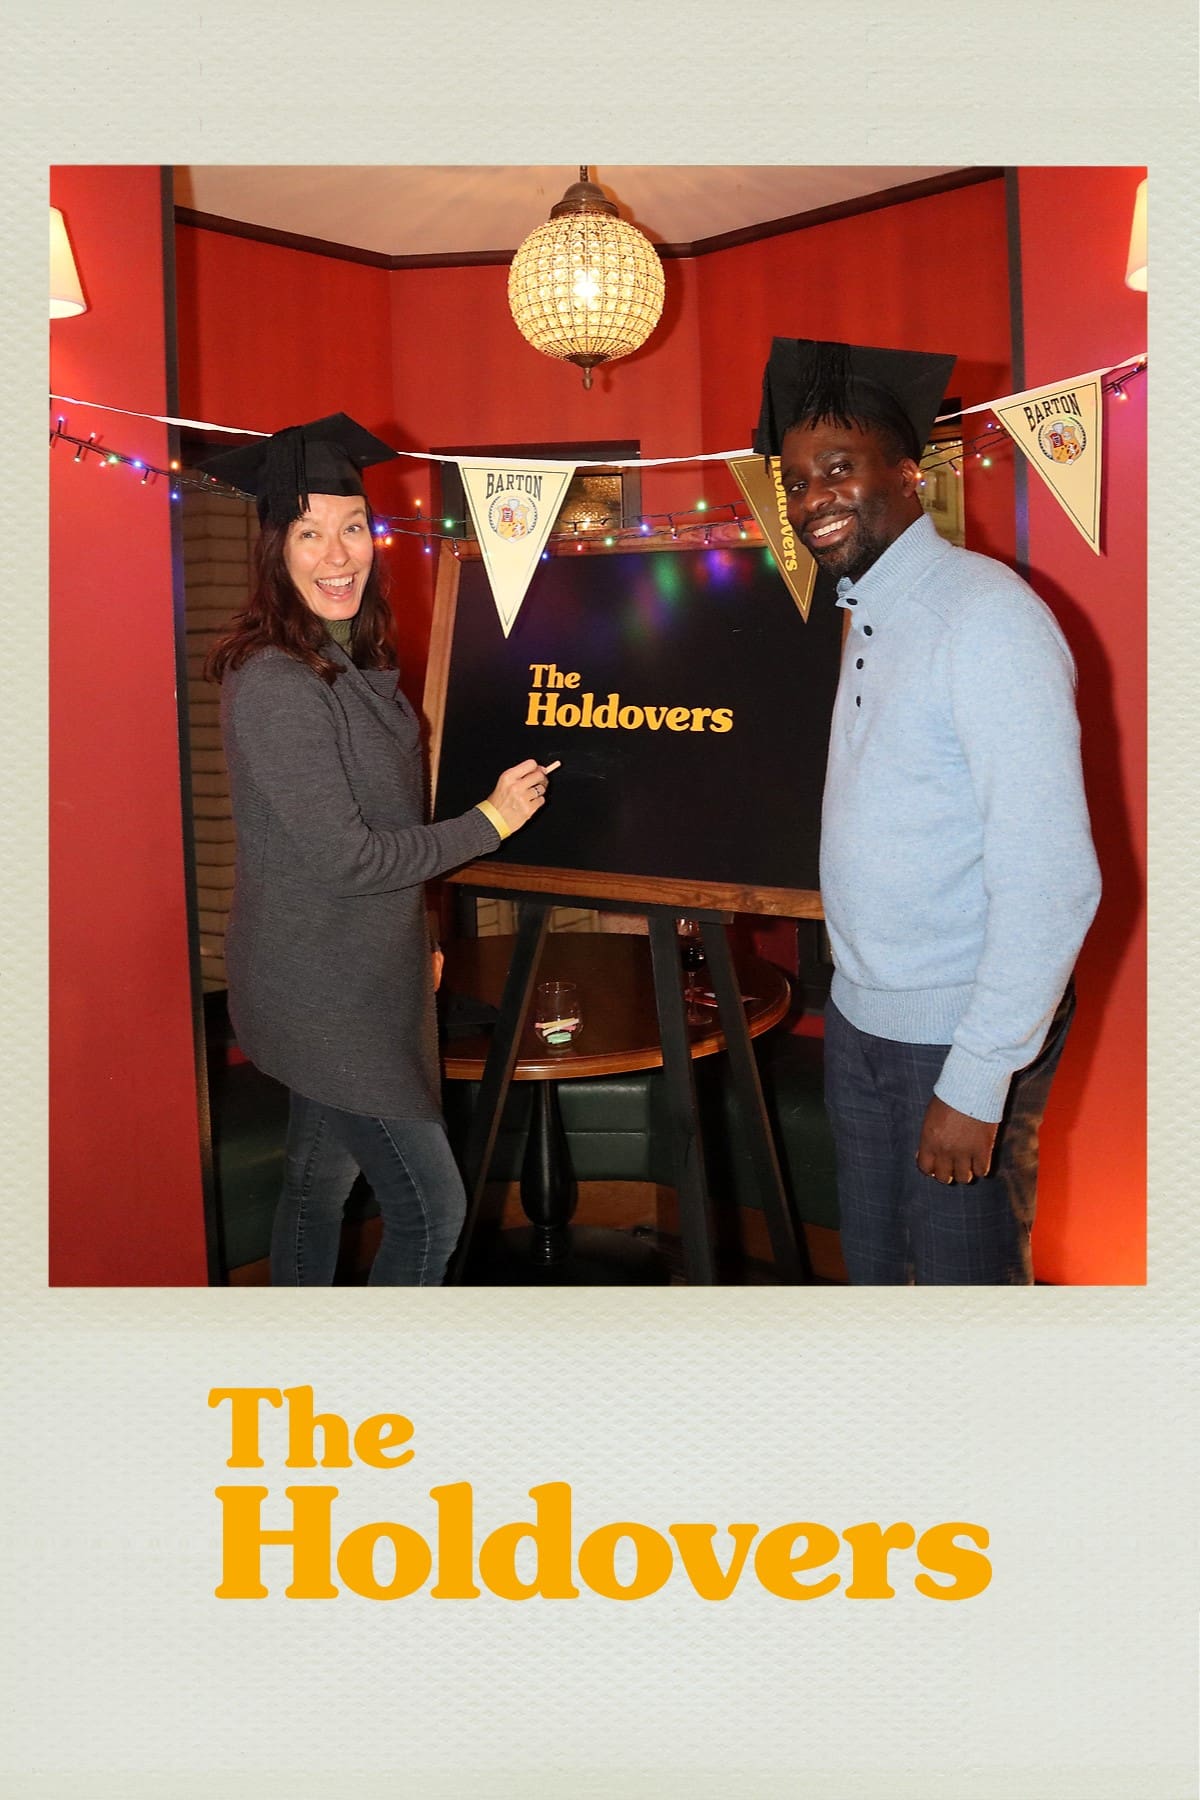 The Holdovers, Piccadilly Circus, Central London photo booth Hire